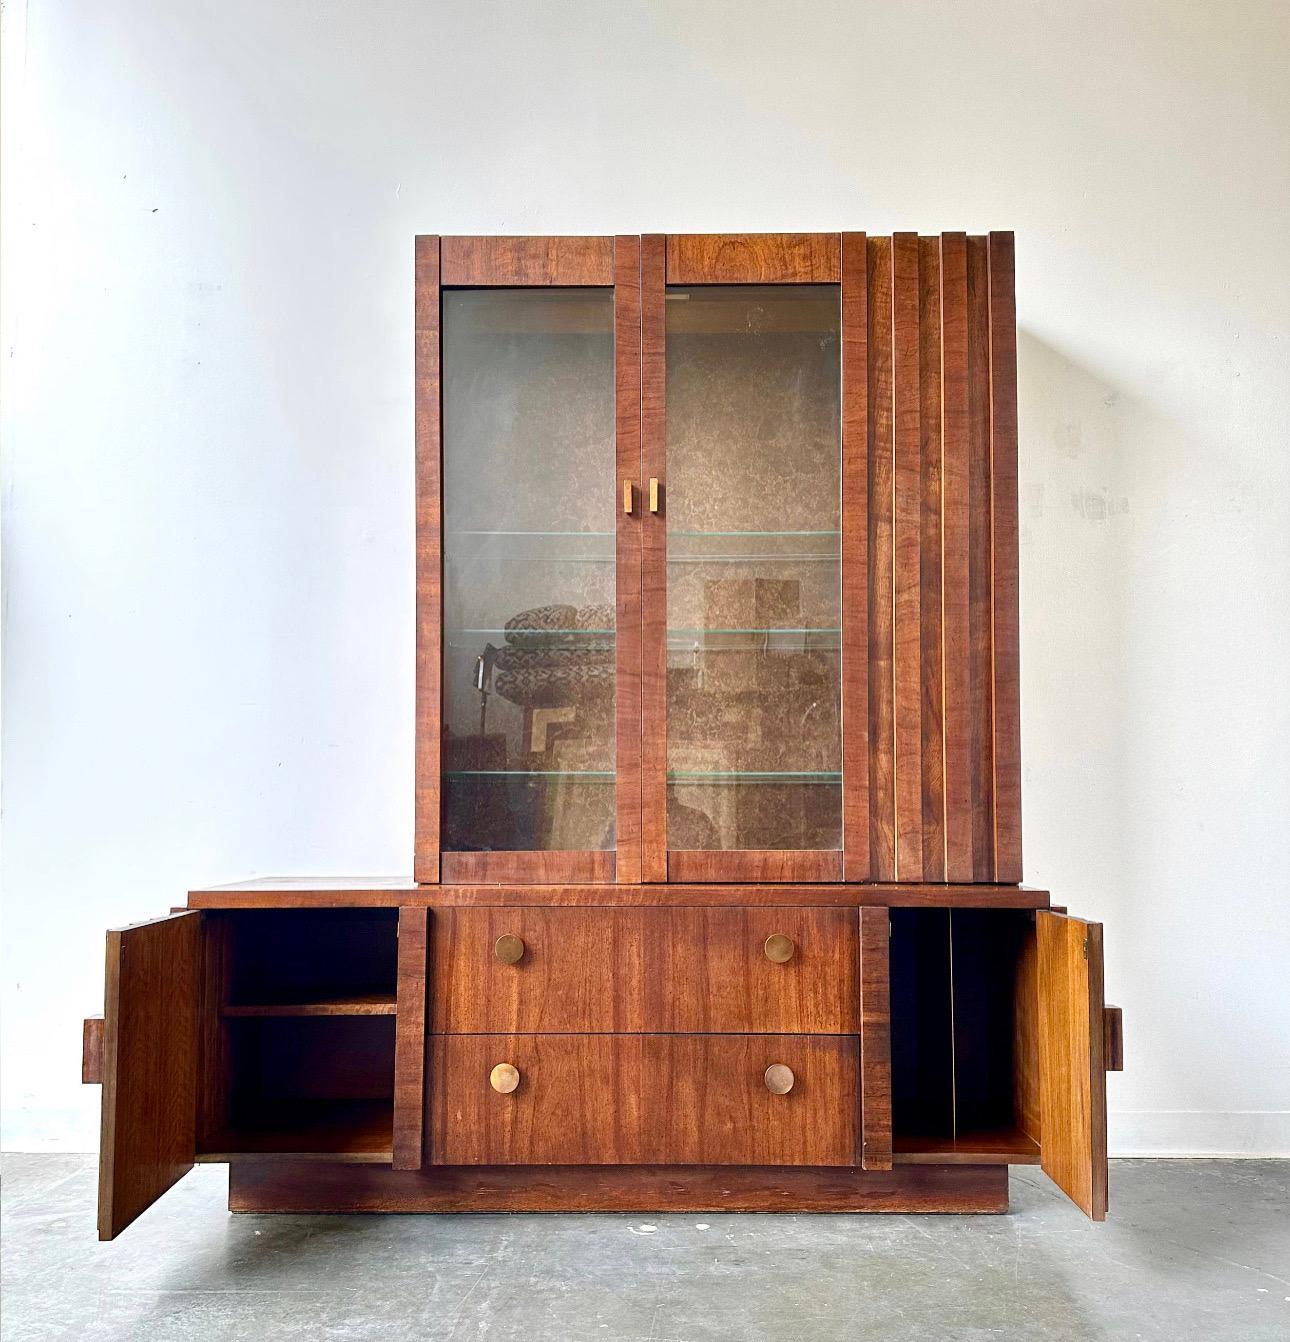 Lane furniture company 

Paul Evans inspired brutalist style two piece china cabinet.

Stunning walnut piece with great lines and design.    This is in great vintage condition with minor signs of age appropriate wear.

Dimensions:
66” W x 19” D x